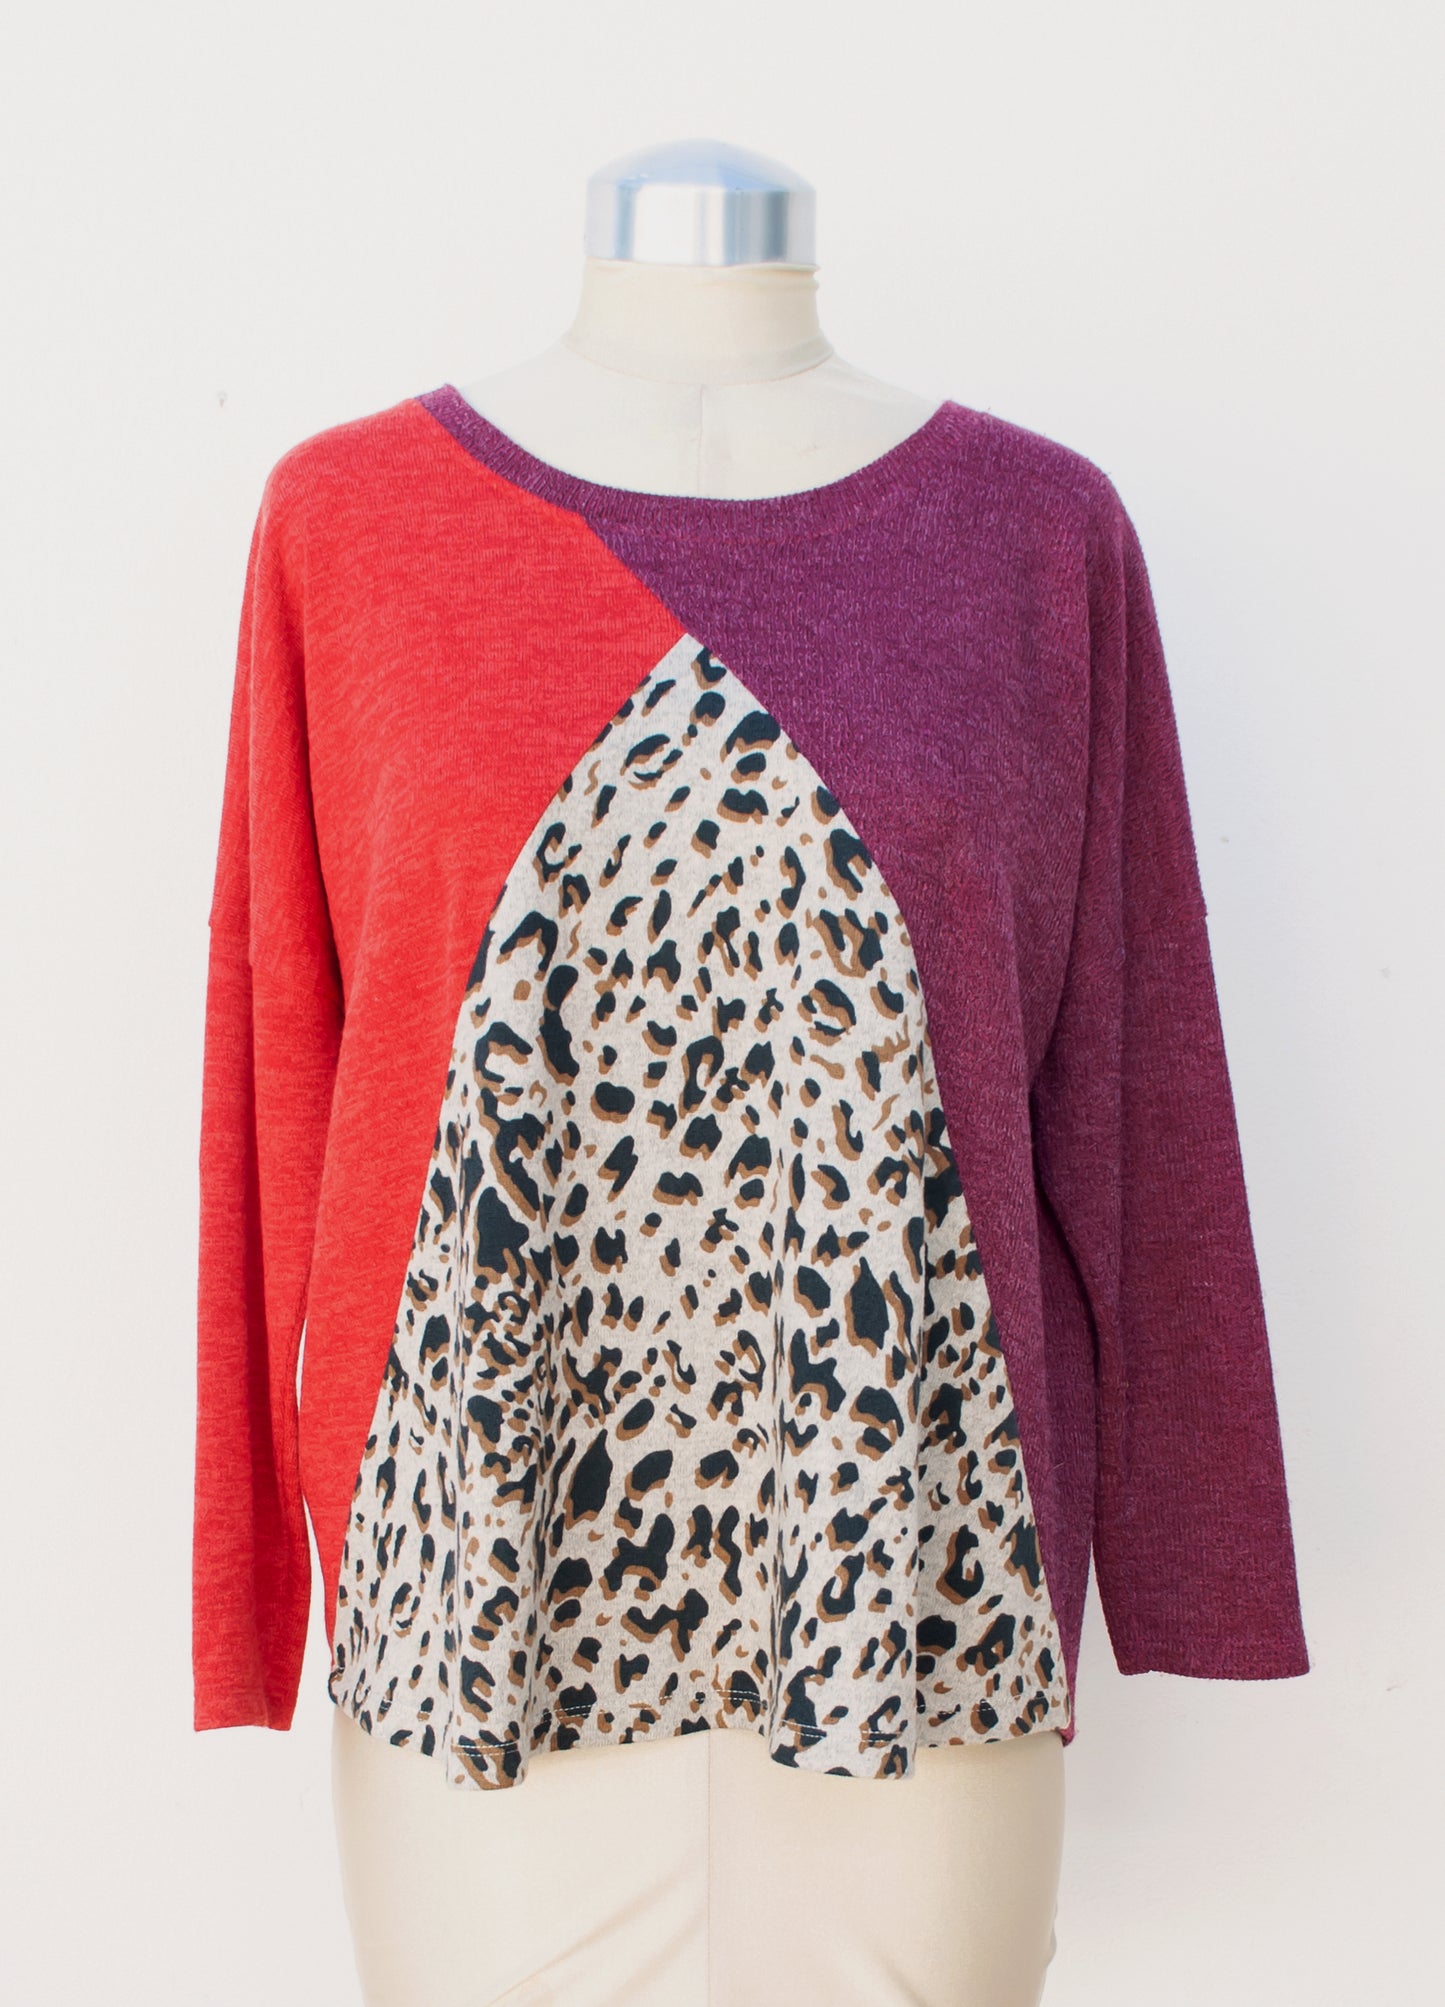 Caprice knit pullover in Red & Leopard size 34